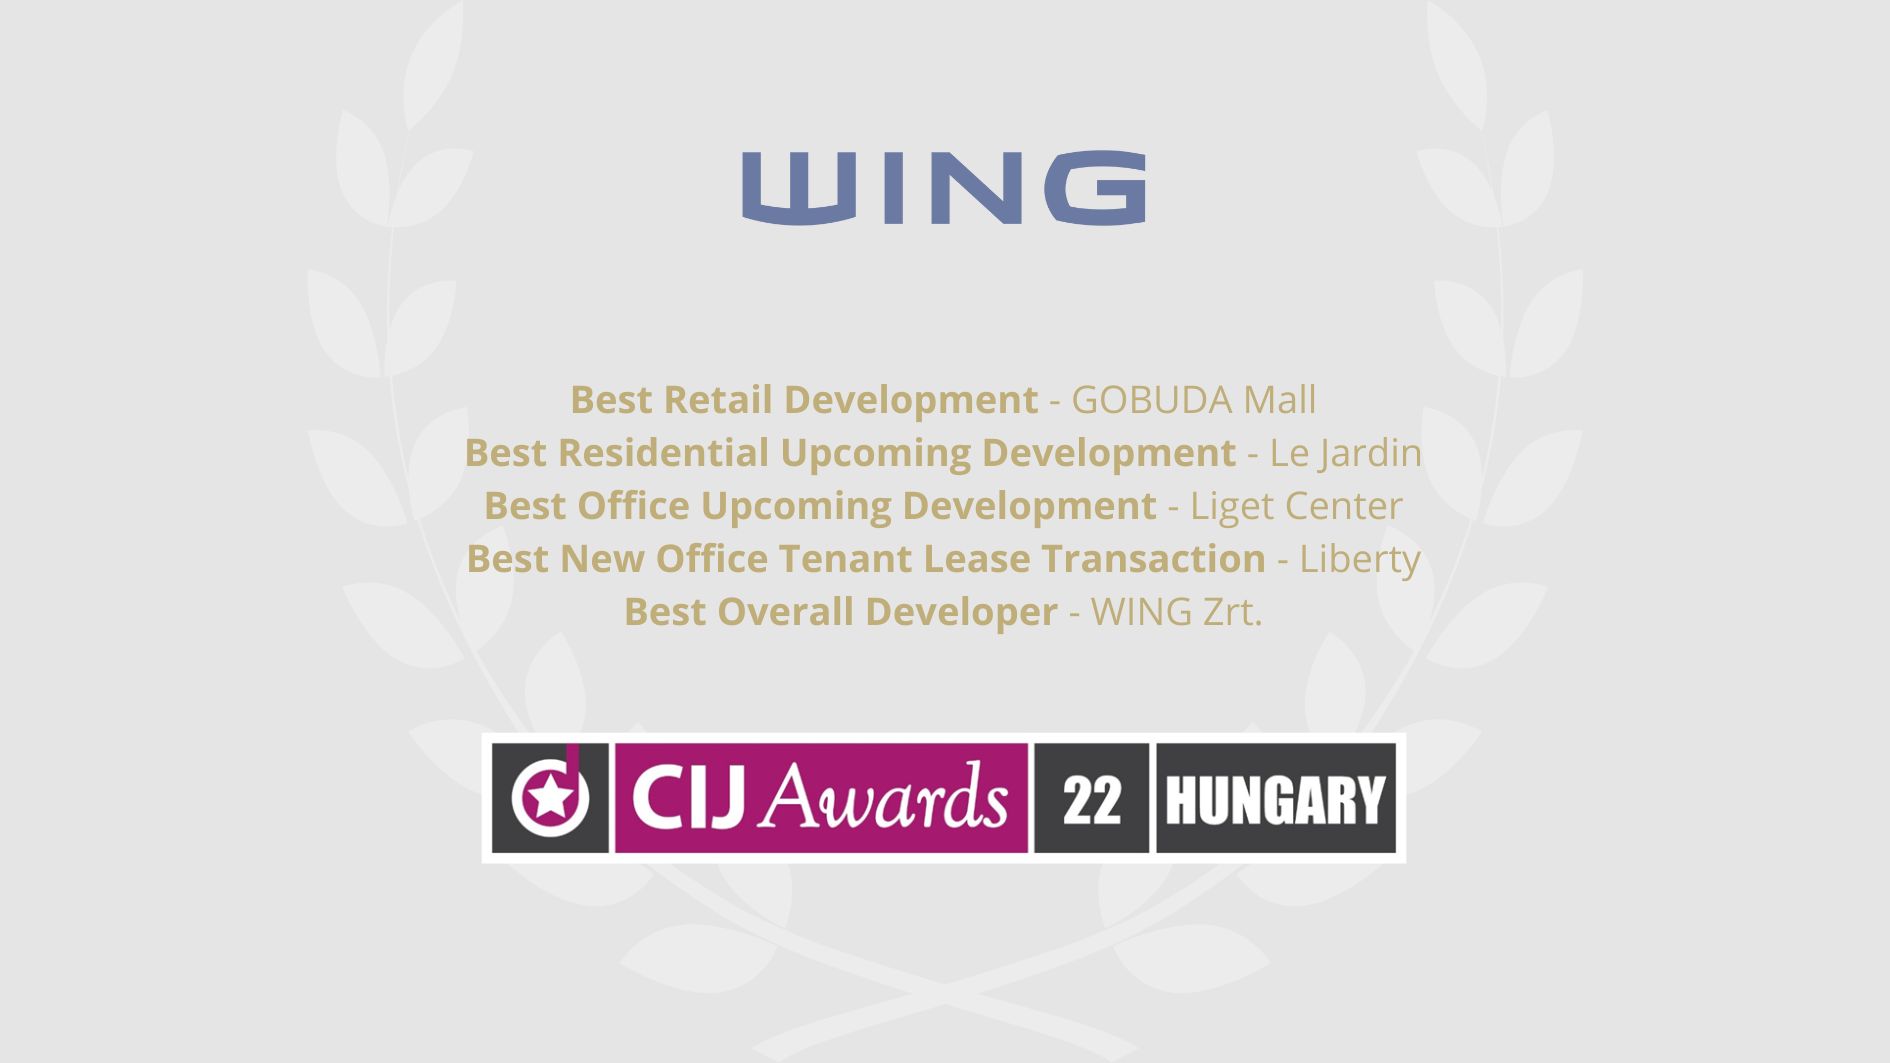 WING receives awards in five categories at this year’s CIJ Awards